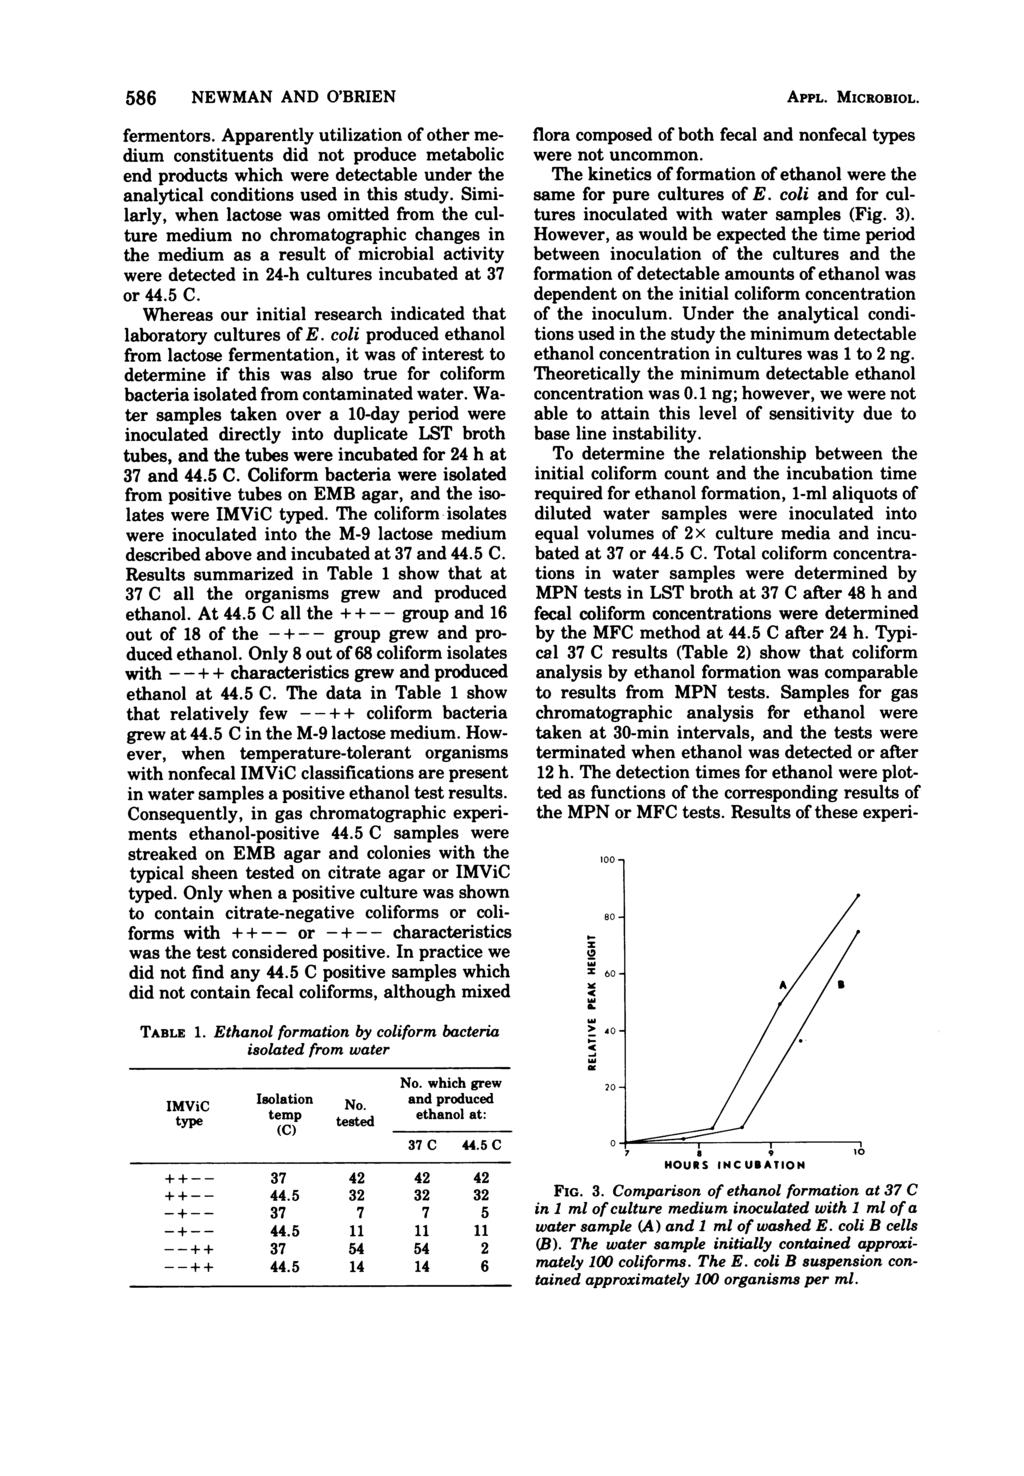 586 NEWMAN AND O'BRIEN fermentors. Apparently utilization of other medium constituents did not produce metabolic end products which were detectable under the analytical conditions used in this study.